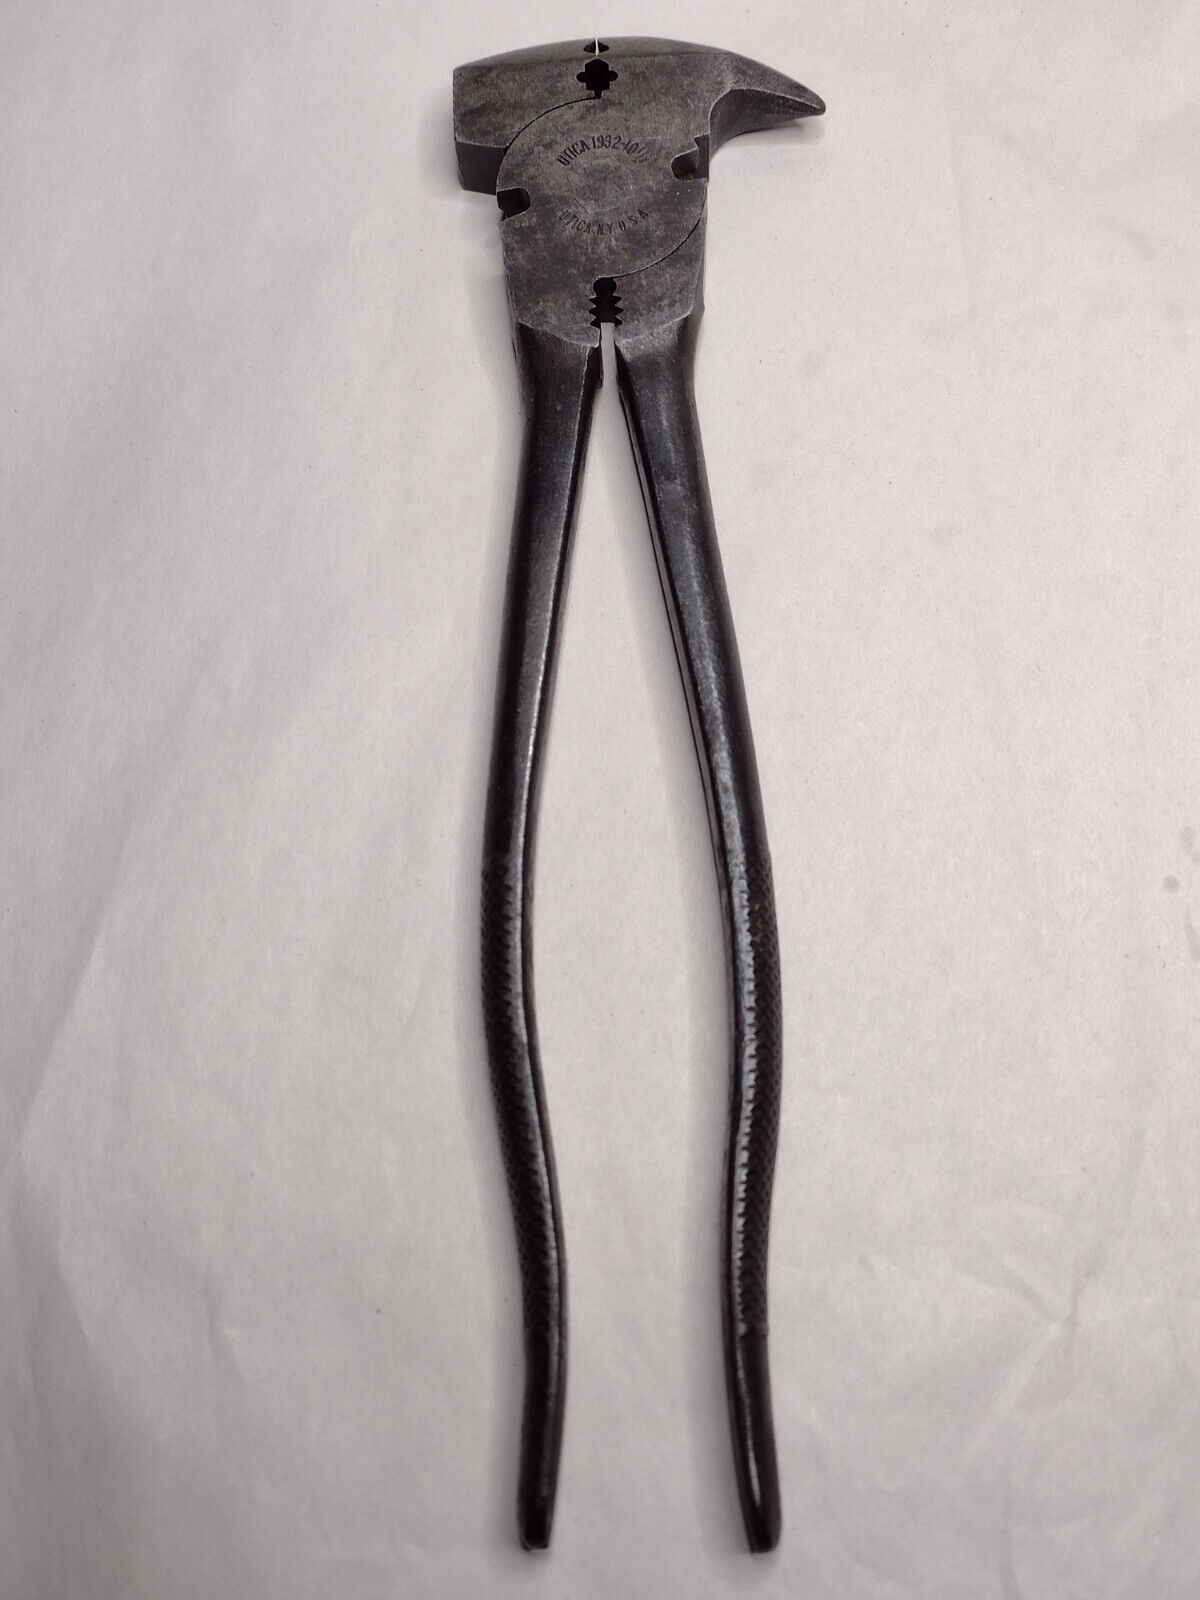 Utica NY USA No. 1932 Multi-Tool Vintage 10-1/4in Fence Pliers